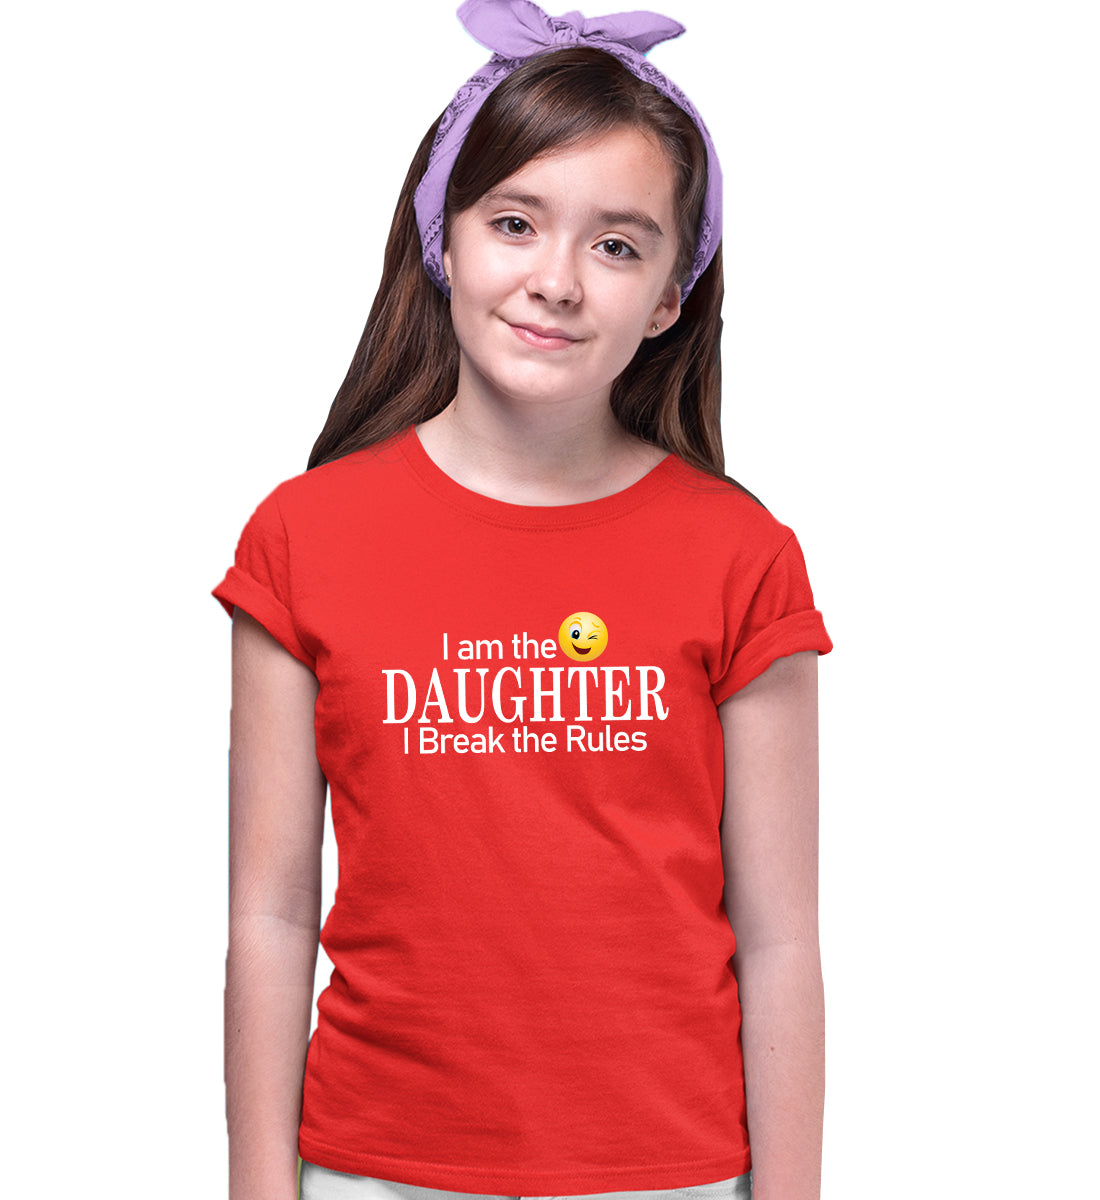 Rules Mother - Daughter Matching Printed Tshirts (Pack Of 2)